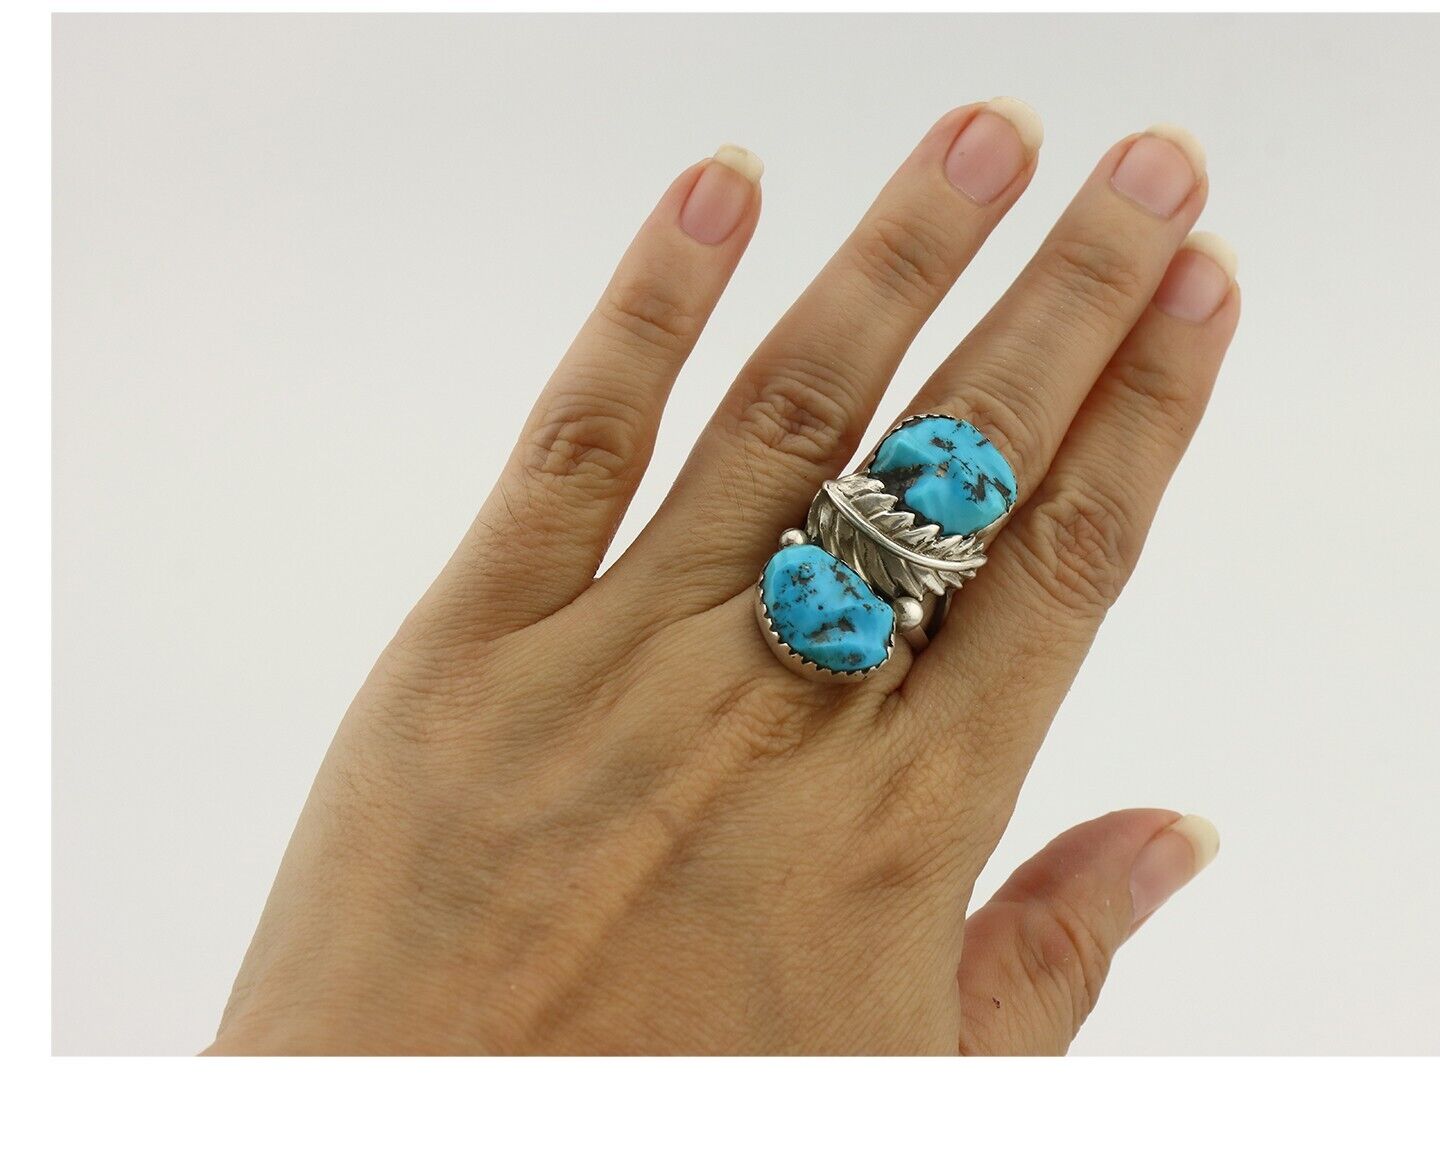 Zuni Ring 925 Silver Sleeping Beauty Turquoise Artist Signed SC C.80's